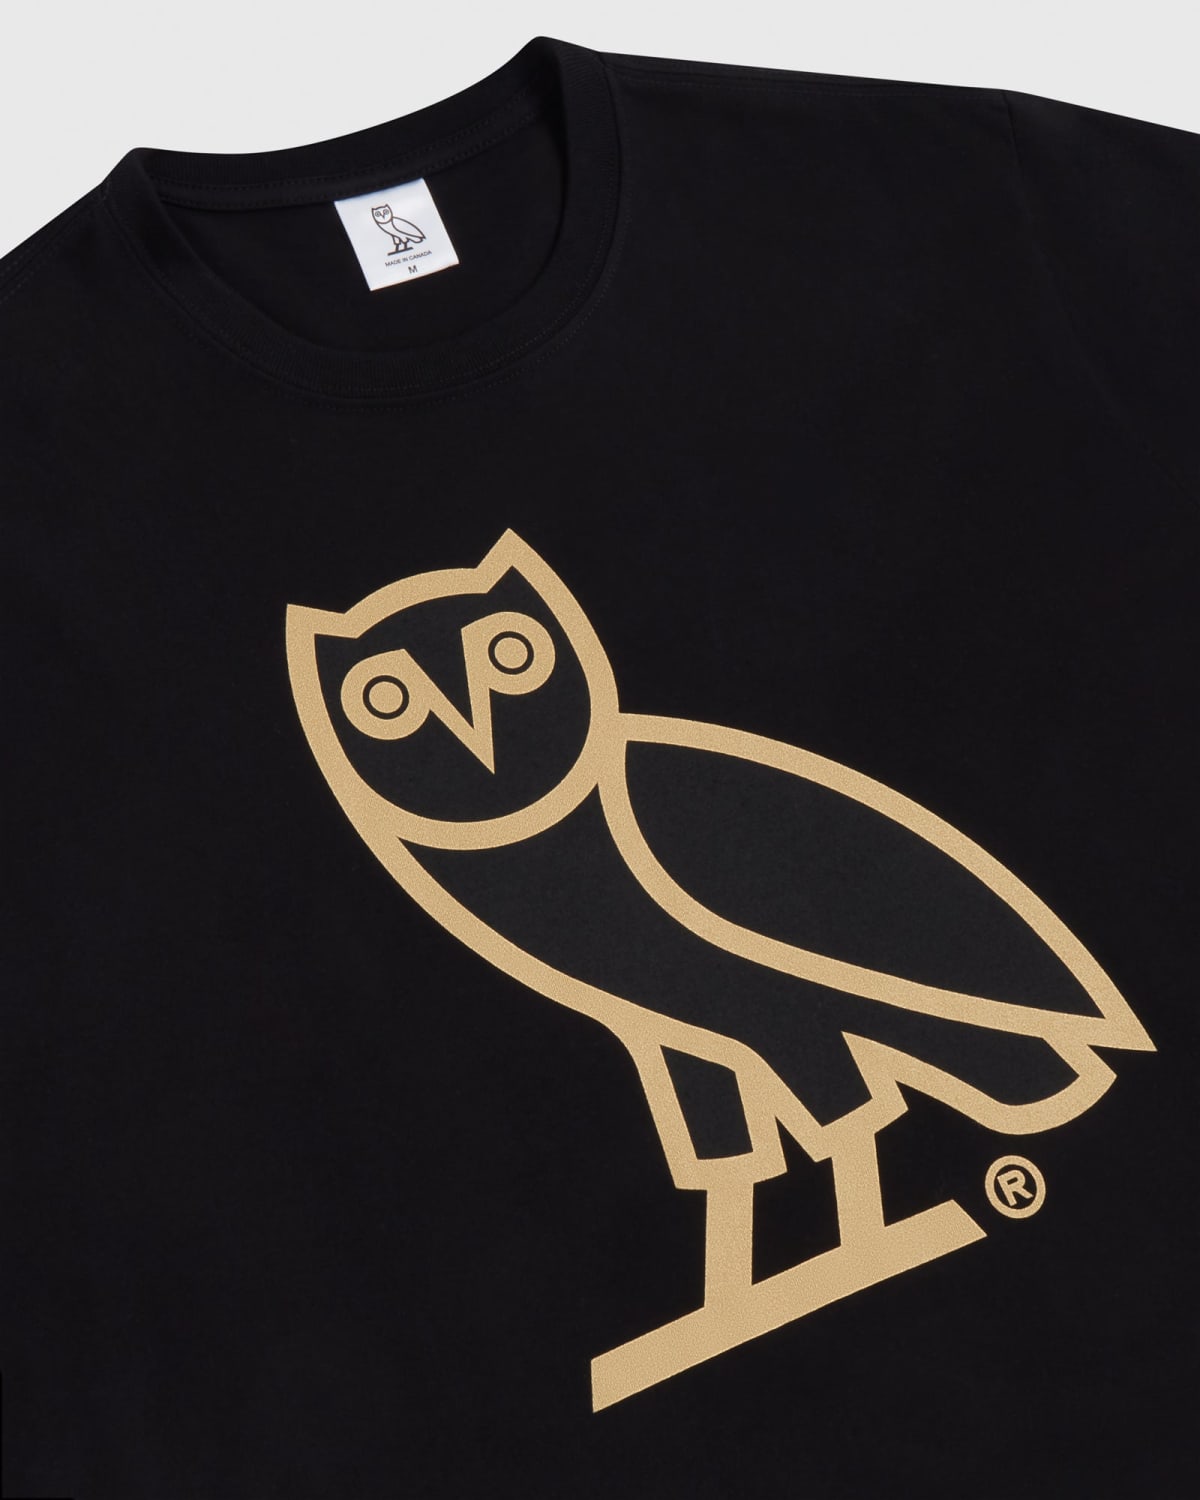 A close-up image of a black OVO crewneck sweater with a gold outline of an owl on the front